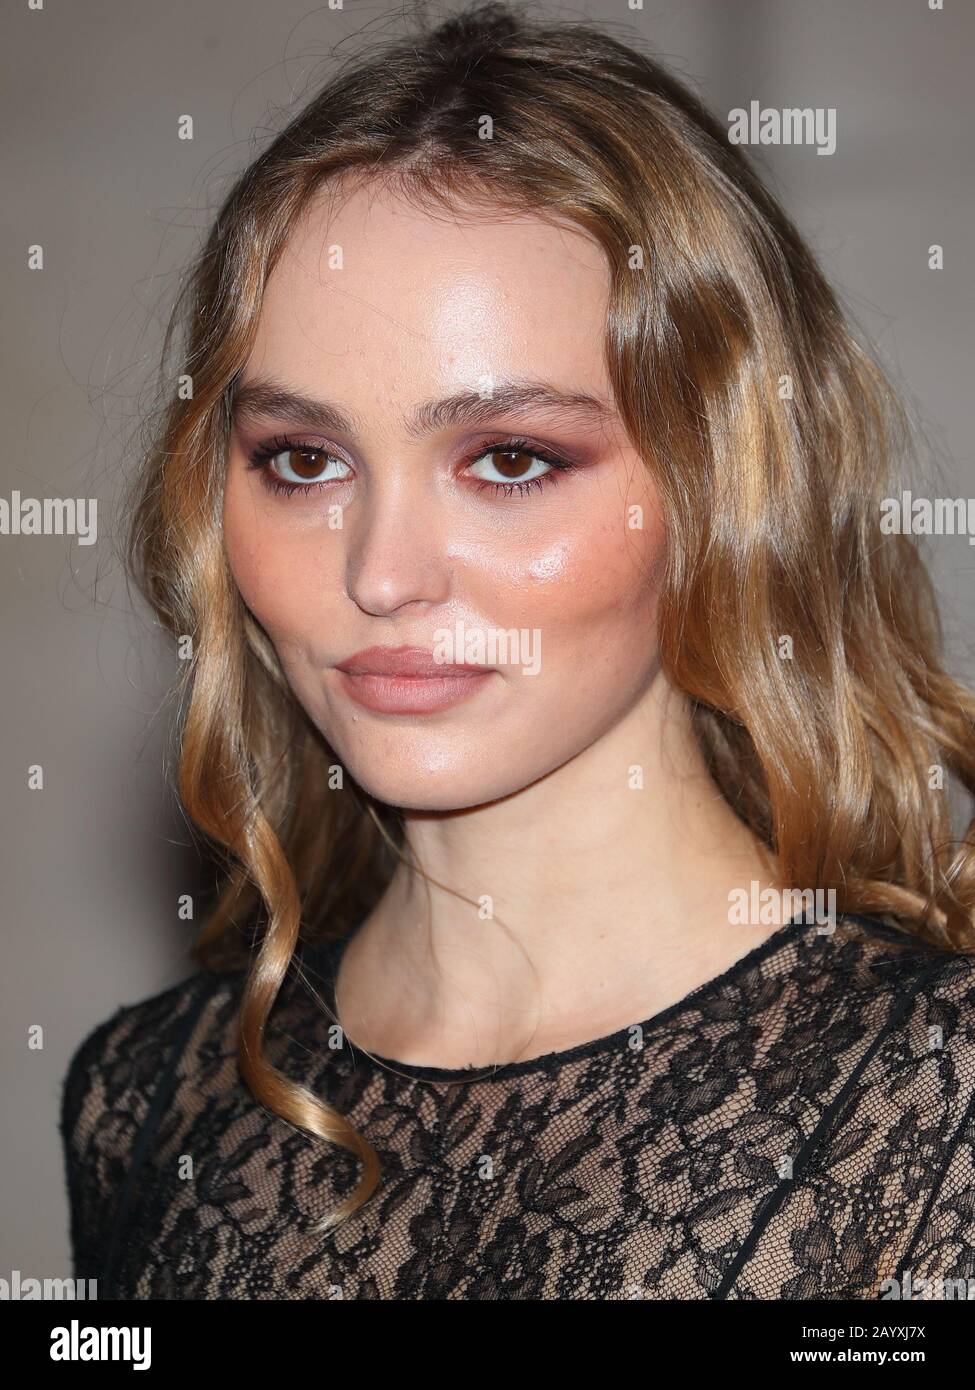 American-French Actress Lily-Rose Depp attends the EE BAFTA after-party dinner at the Grosvenor House Hotel in London, UK Stock Photo